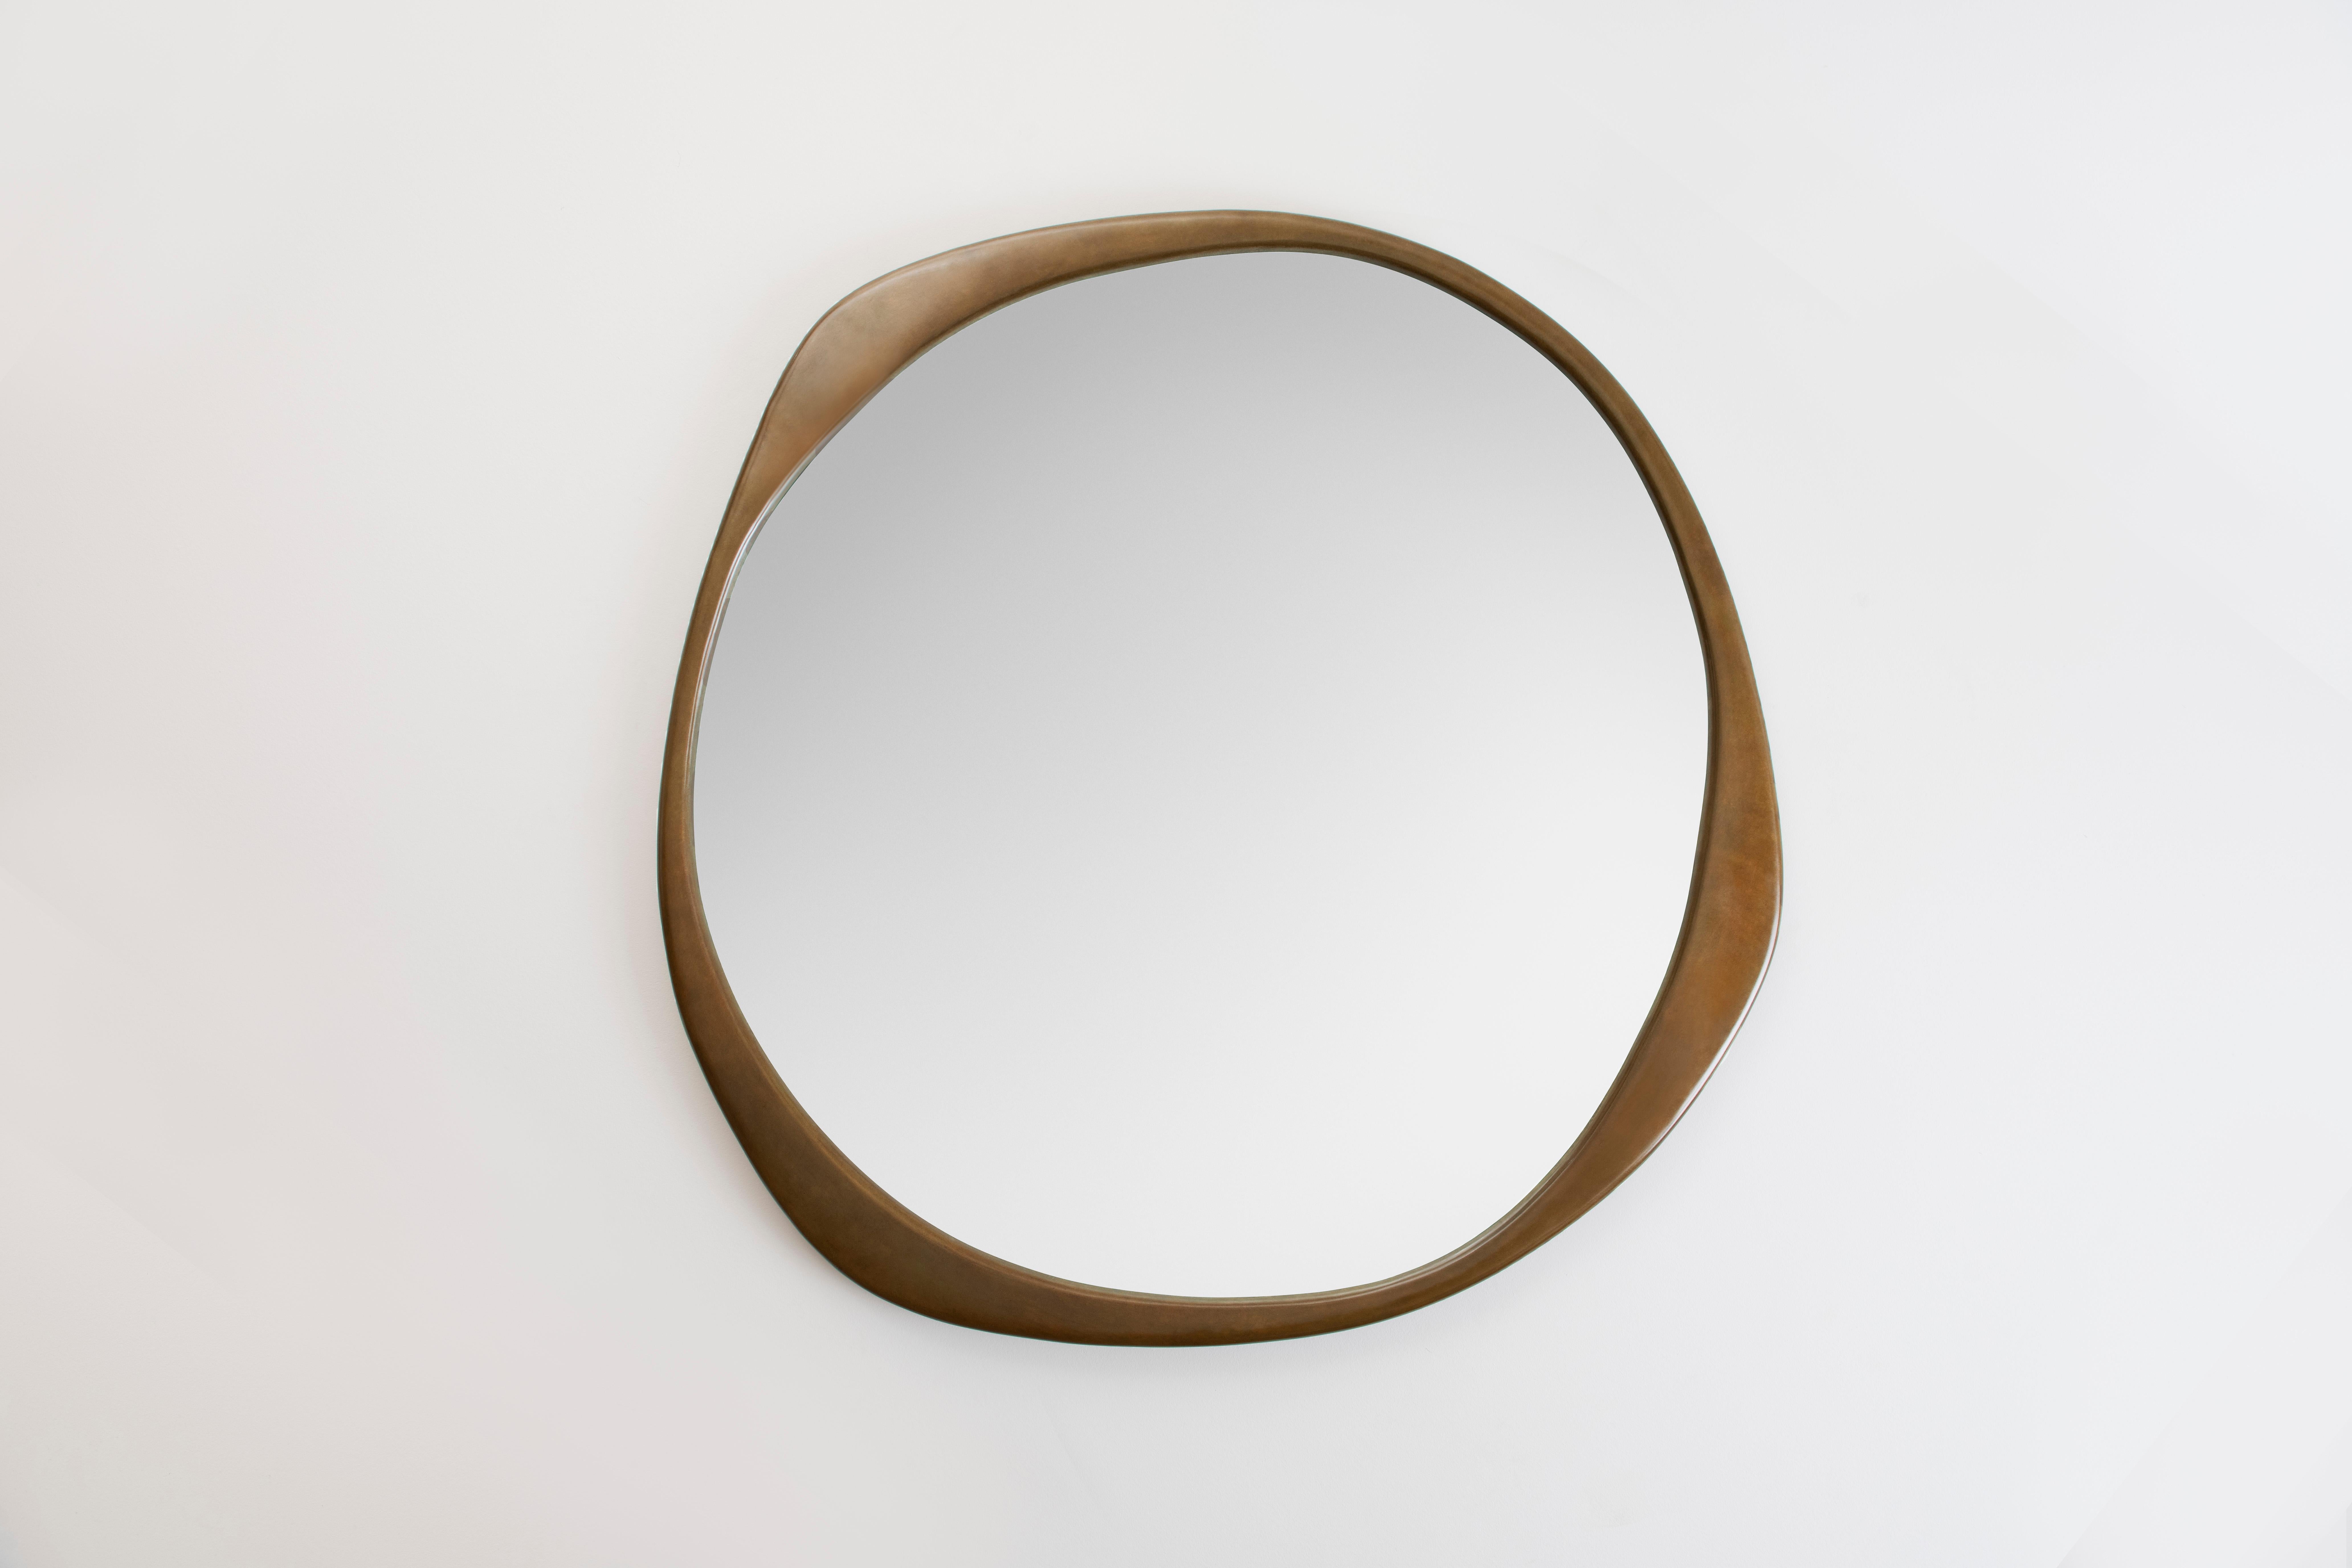 The sculptural A.Cepa mirror in hand-patina bronze is cast in bronze at a fine art foundry in Pennsylvania, and skillfully finished by hand. Undulating and irregular in form, the A. Cepa mirror is the focal point in any room with its captivating